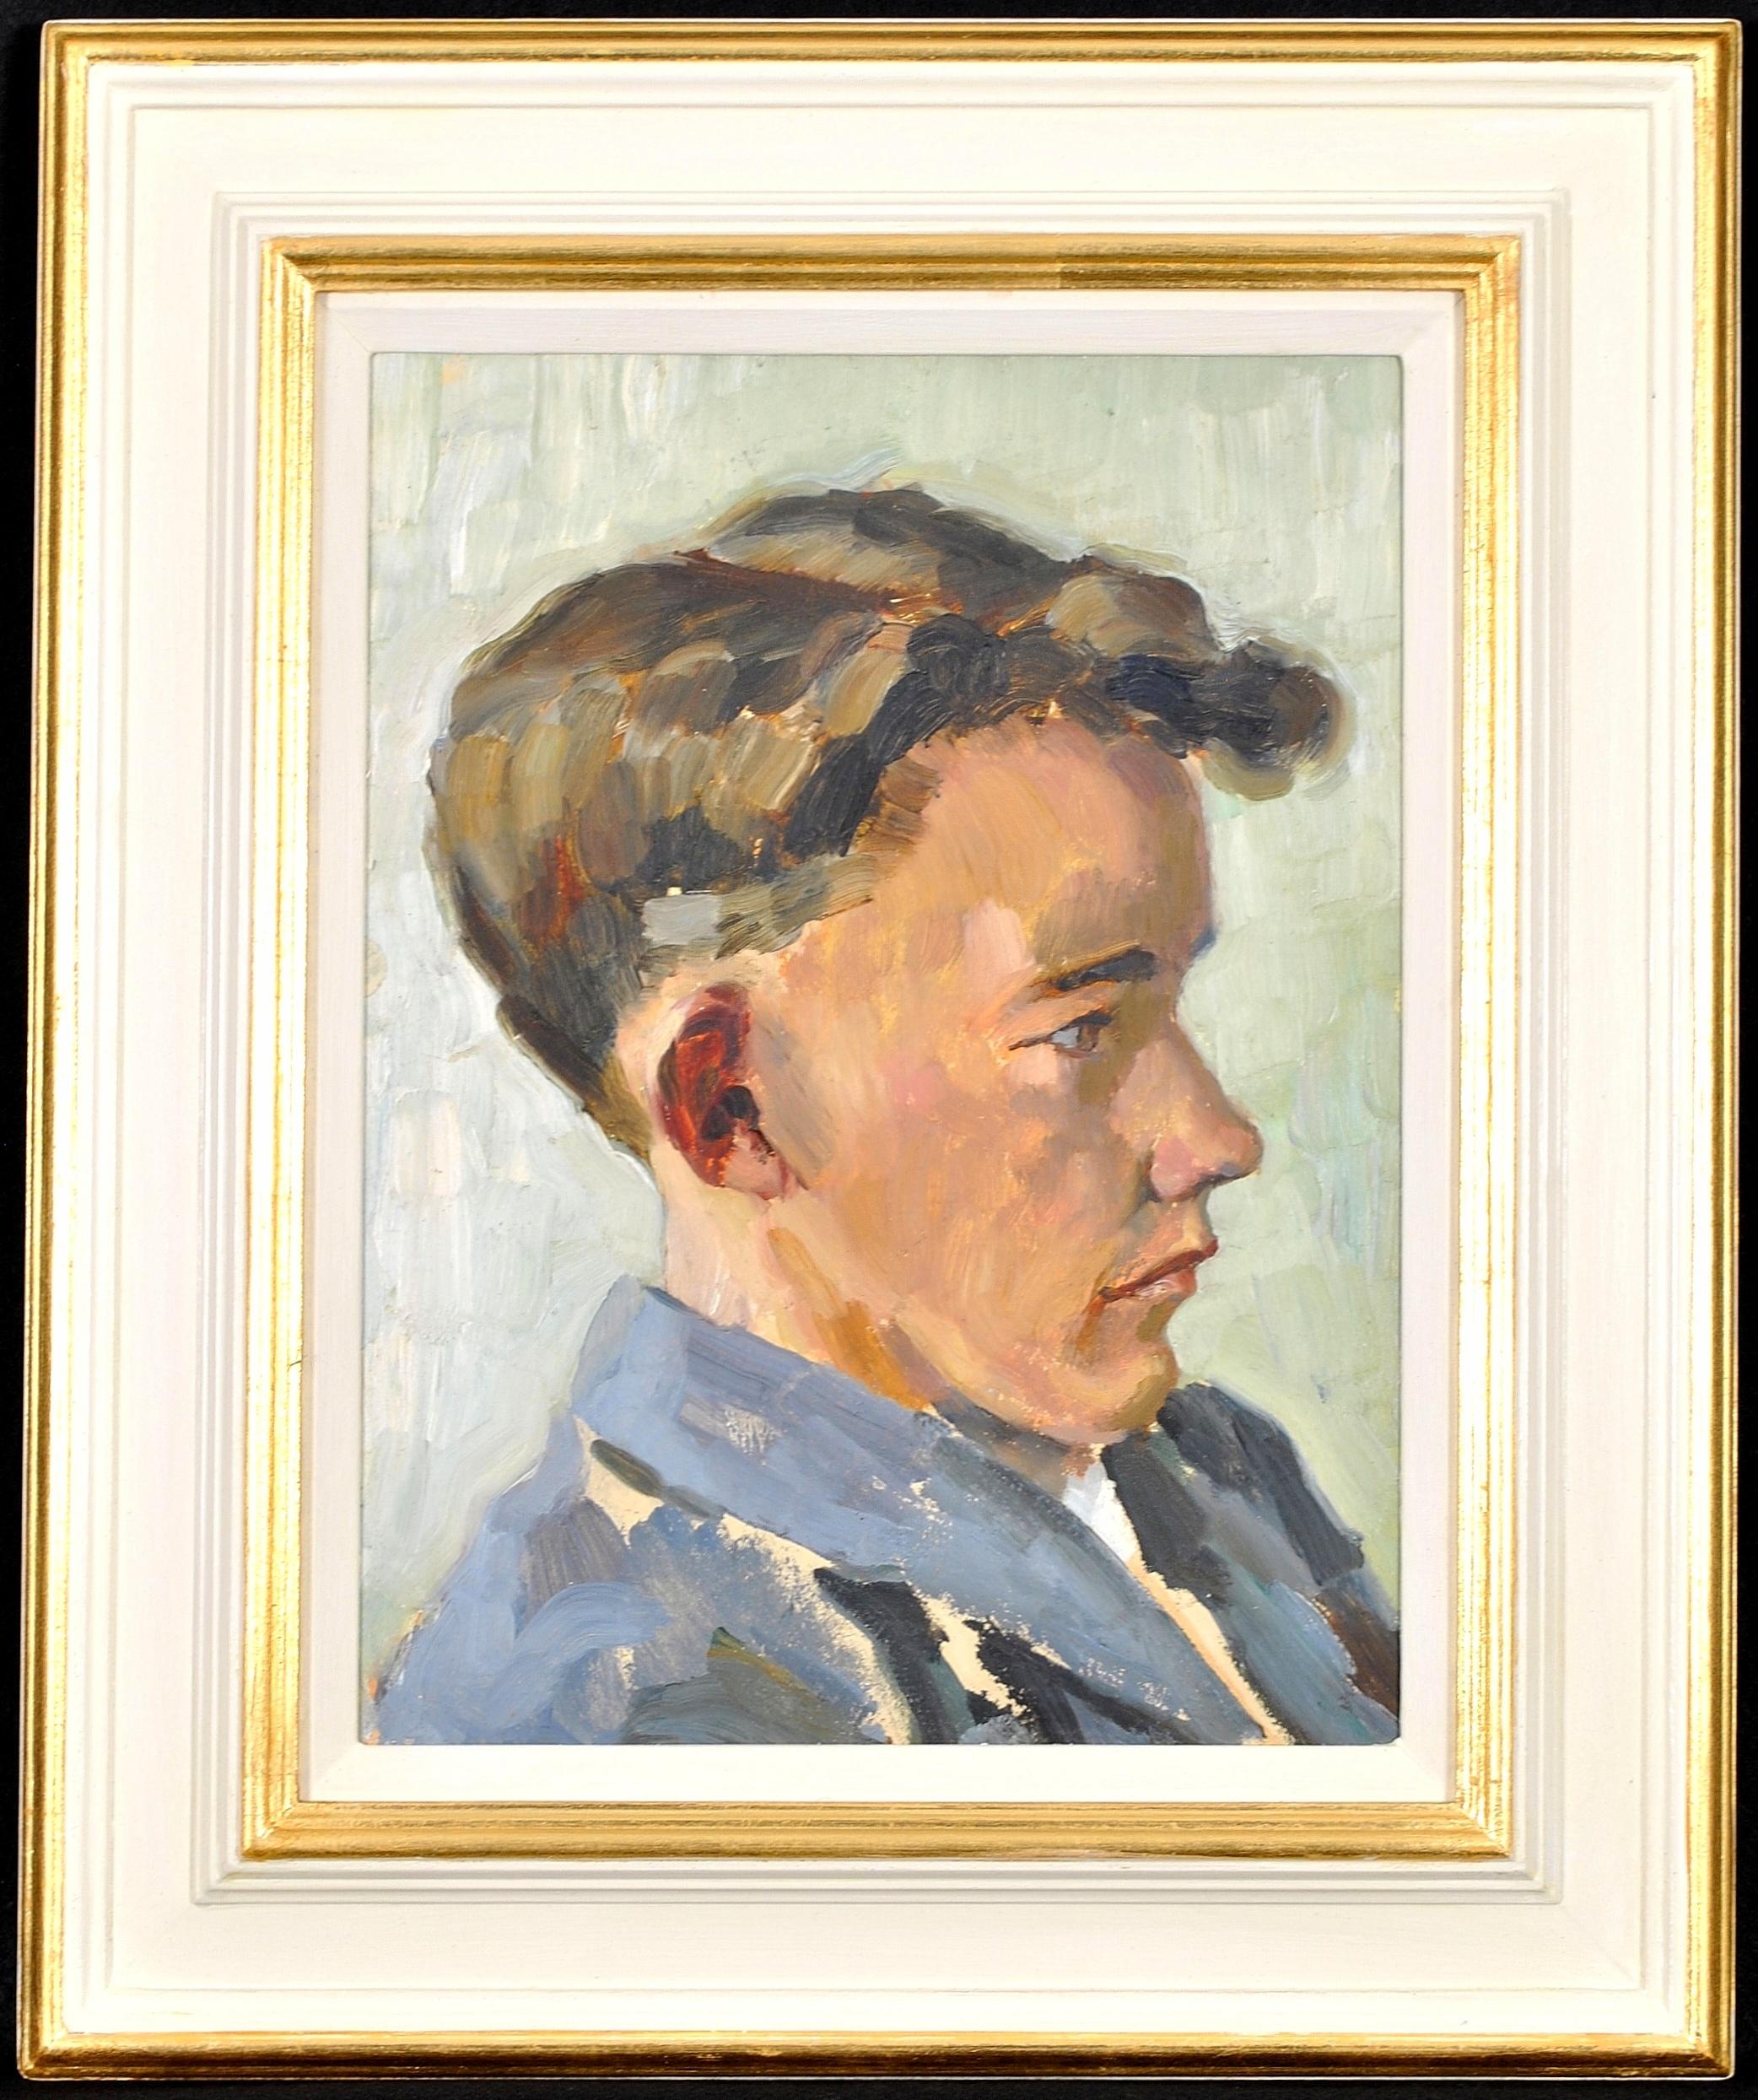 Mid 20th Century British School Portrait Painting - Portrait of a Young Man - Modern British Impressionist Oil on Board Painting